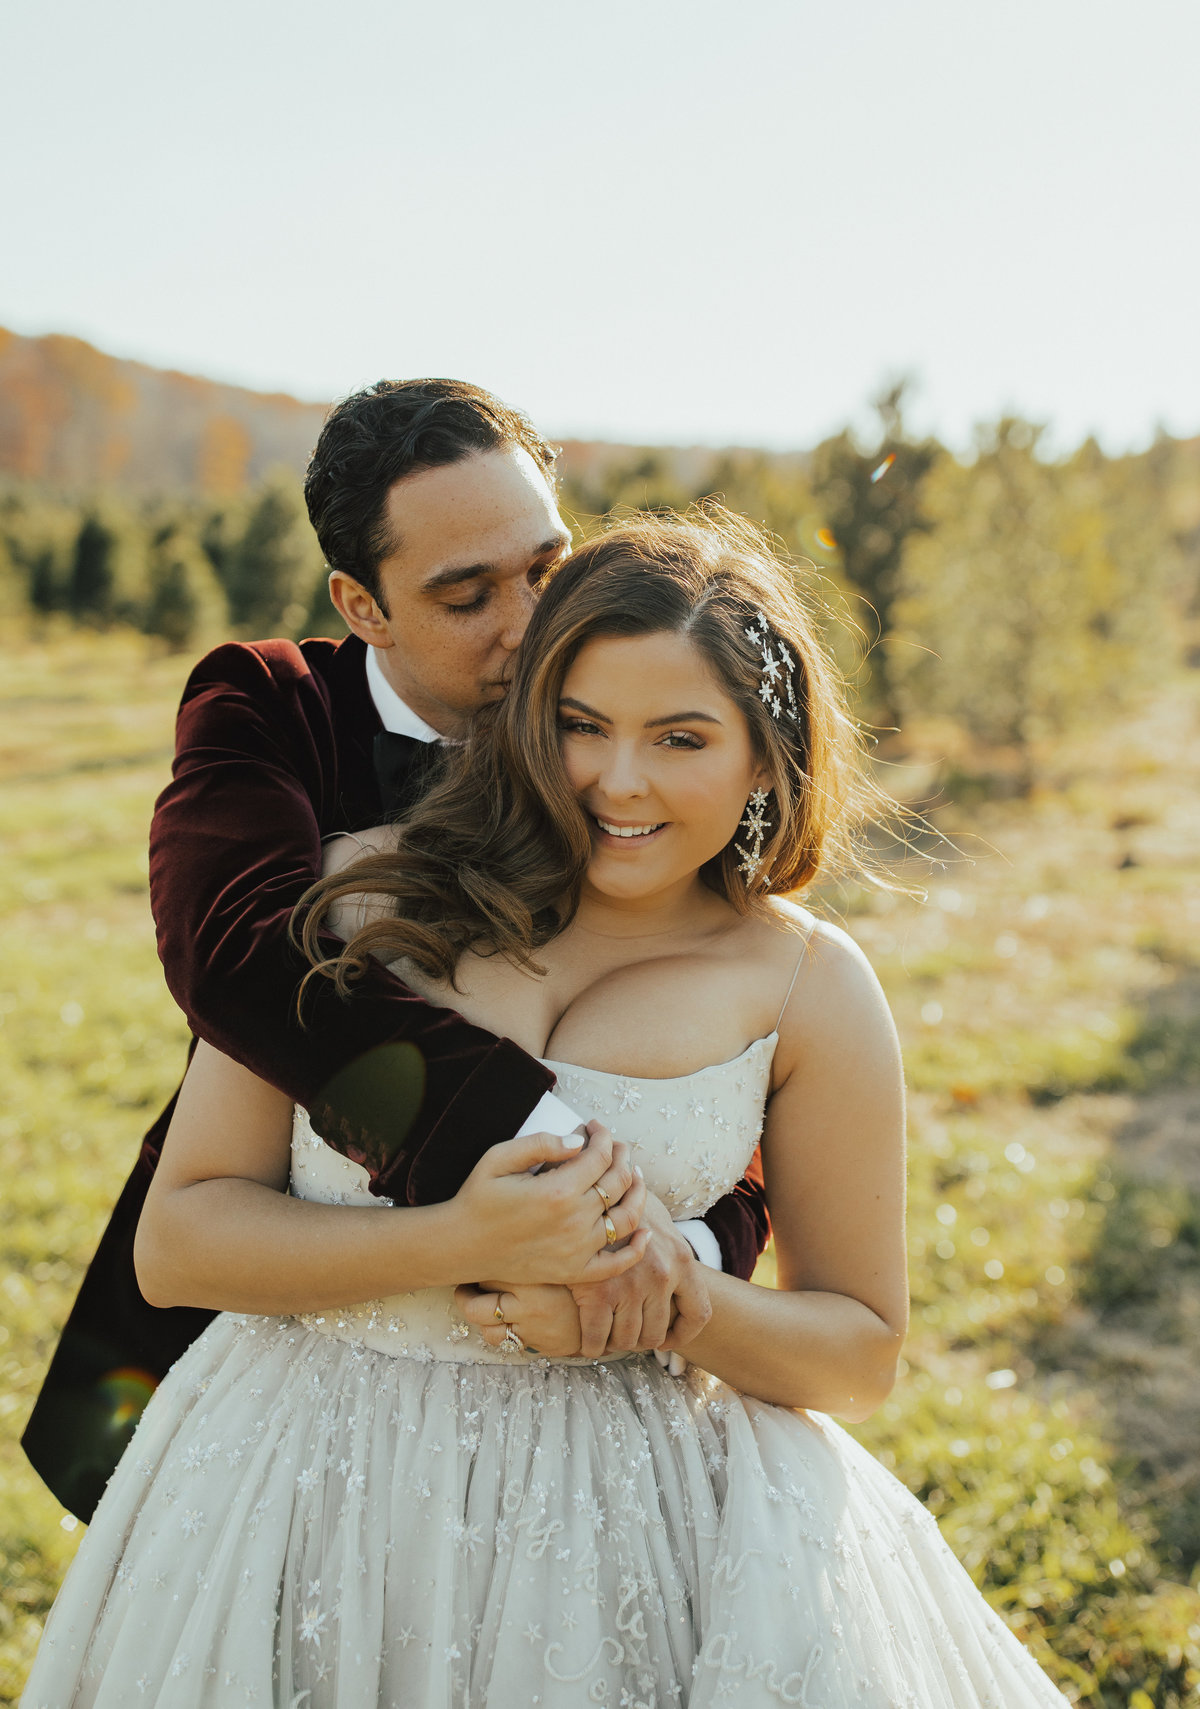 Christy-l-Johnston-Photography-Monica-Relyea-Events-Noelle-Downing-Instagram-Noelle_s-Favorite-Day-Wedding-Battenfelds-Christmas-tree-farm-Red-Hook-New-York-Hudson-Valley-upstate-november-2019-AP1A7676